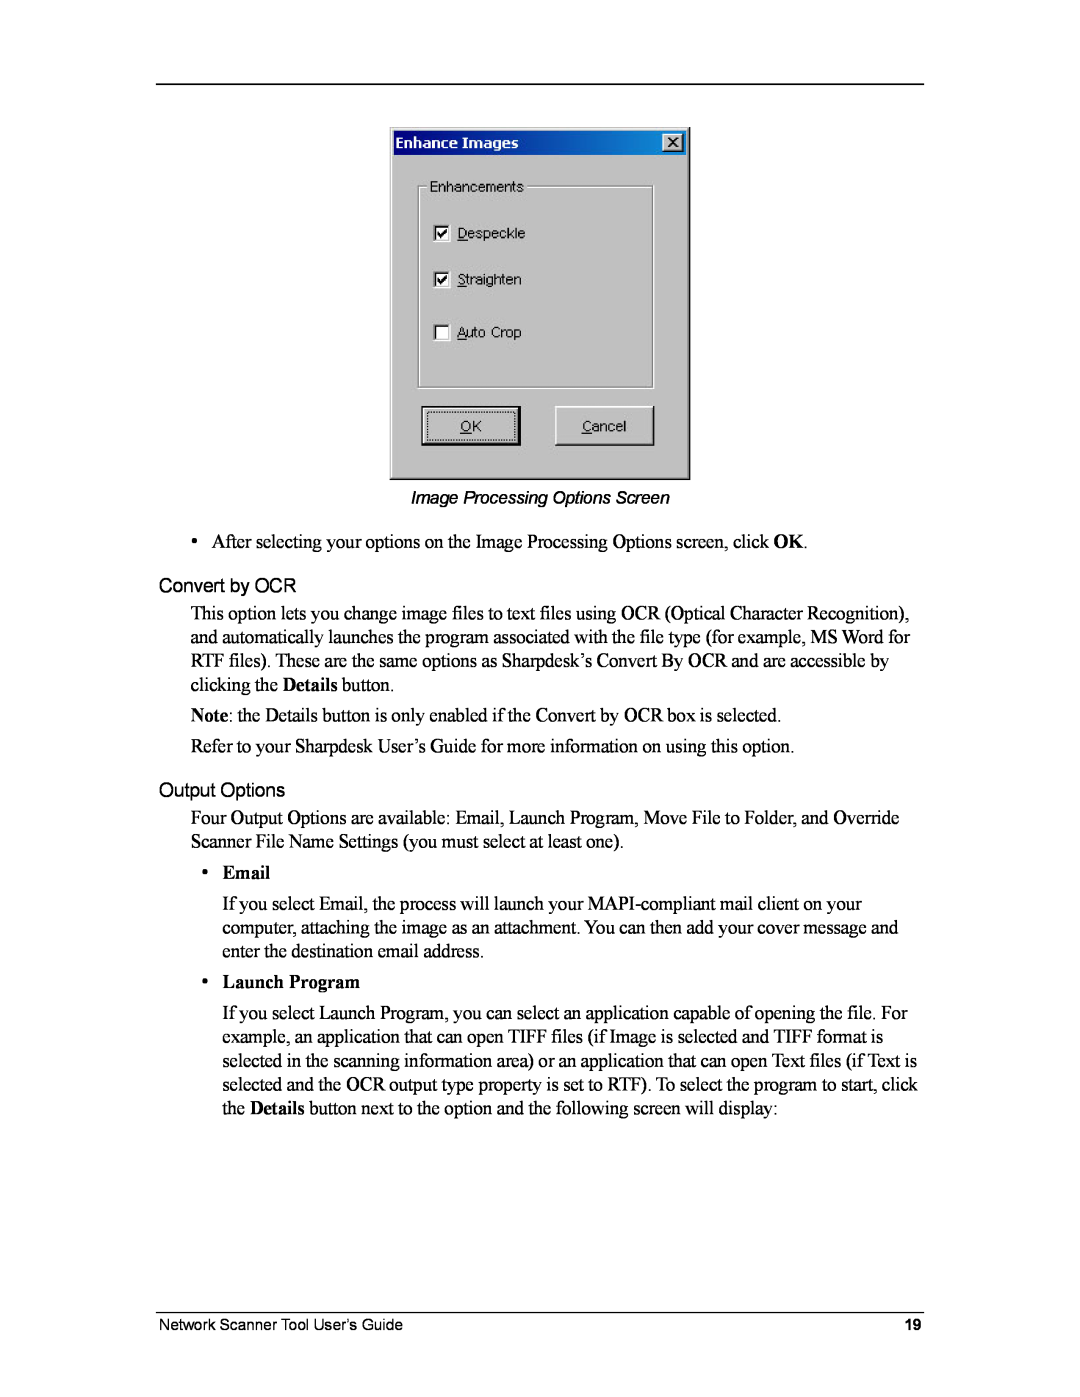 Sharp R3.1 manual Convert by OCR, Output Options, Email, Launch Program 